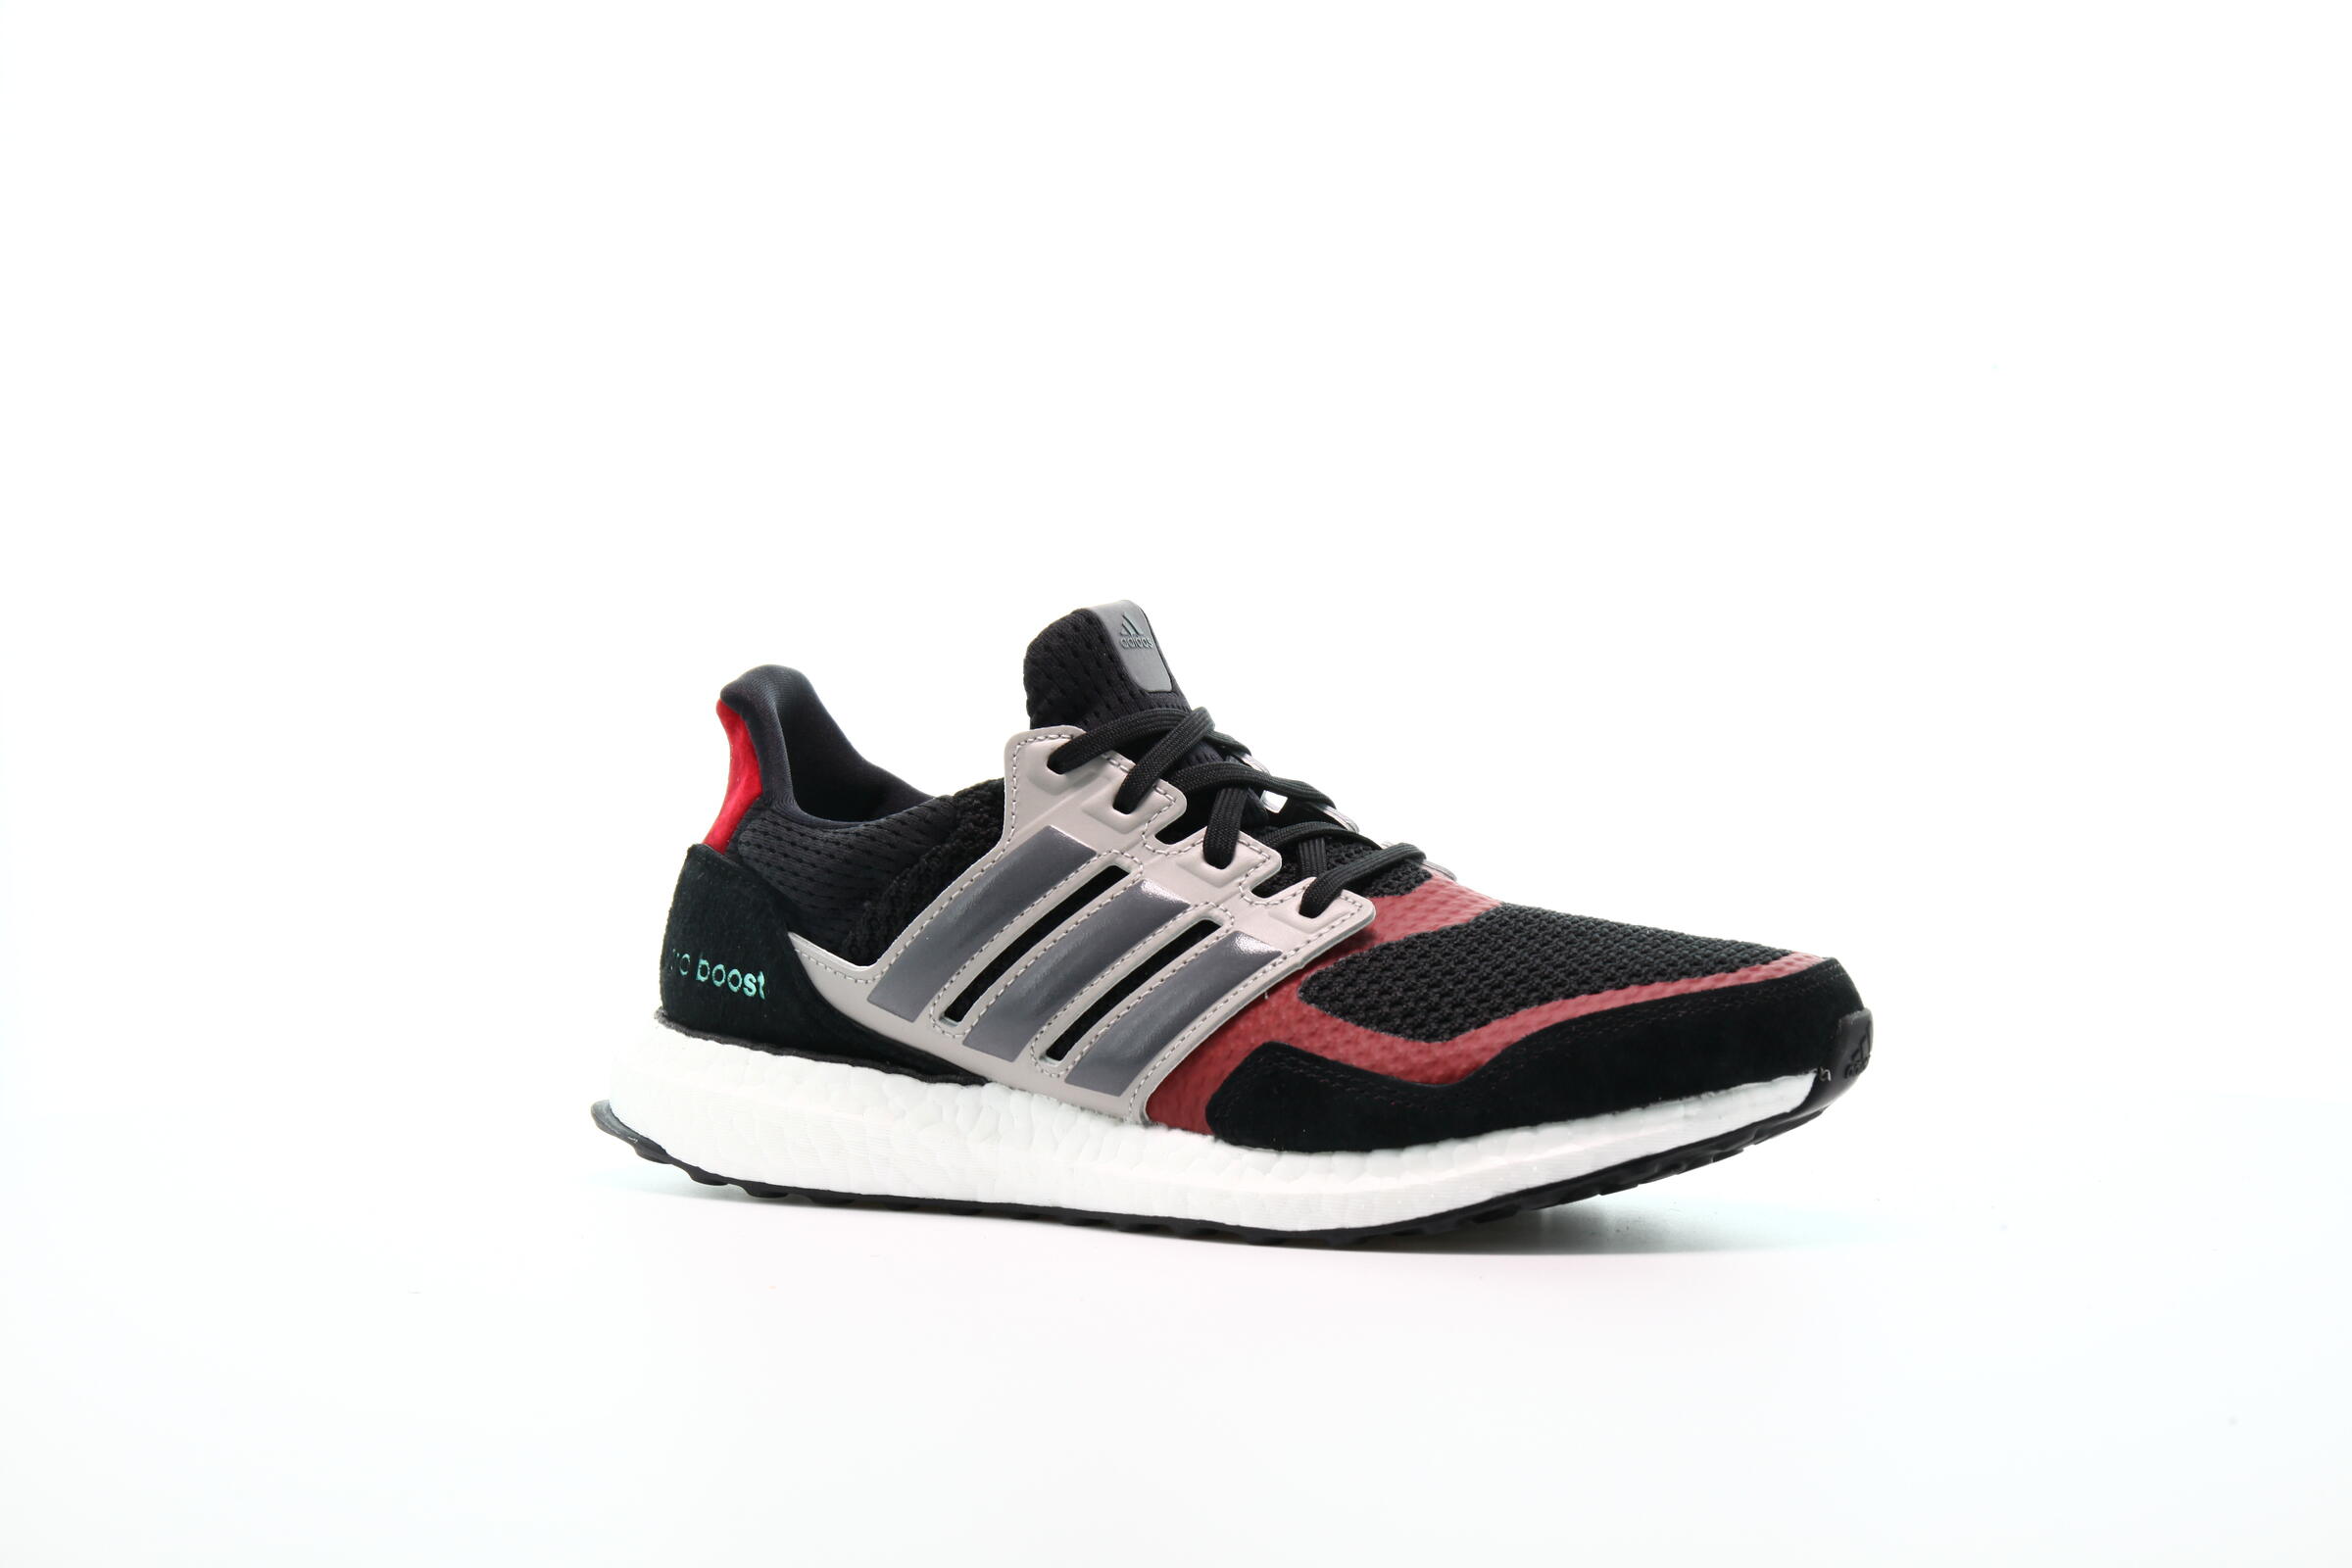 adidas Performance Ultraboost S&L "Power Red"